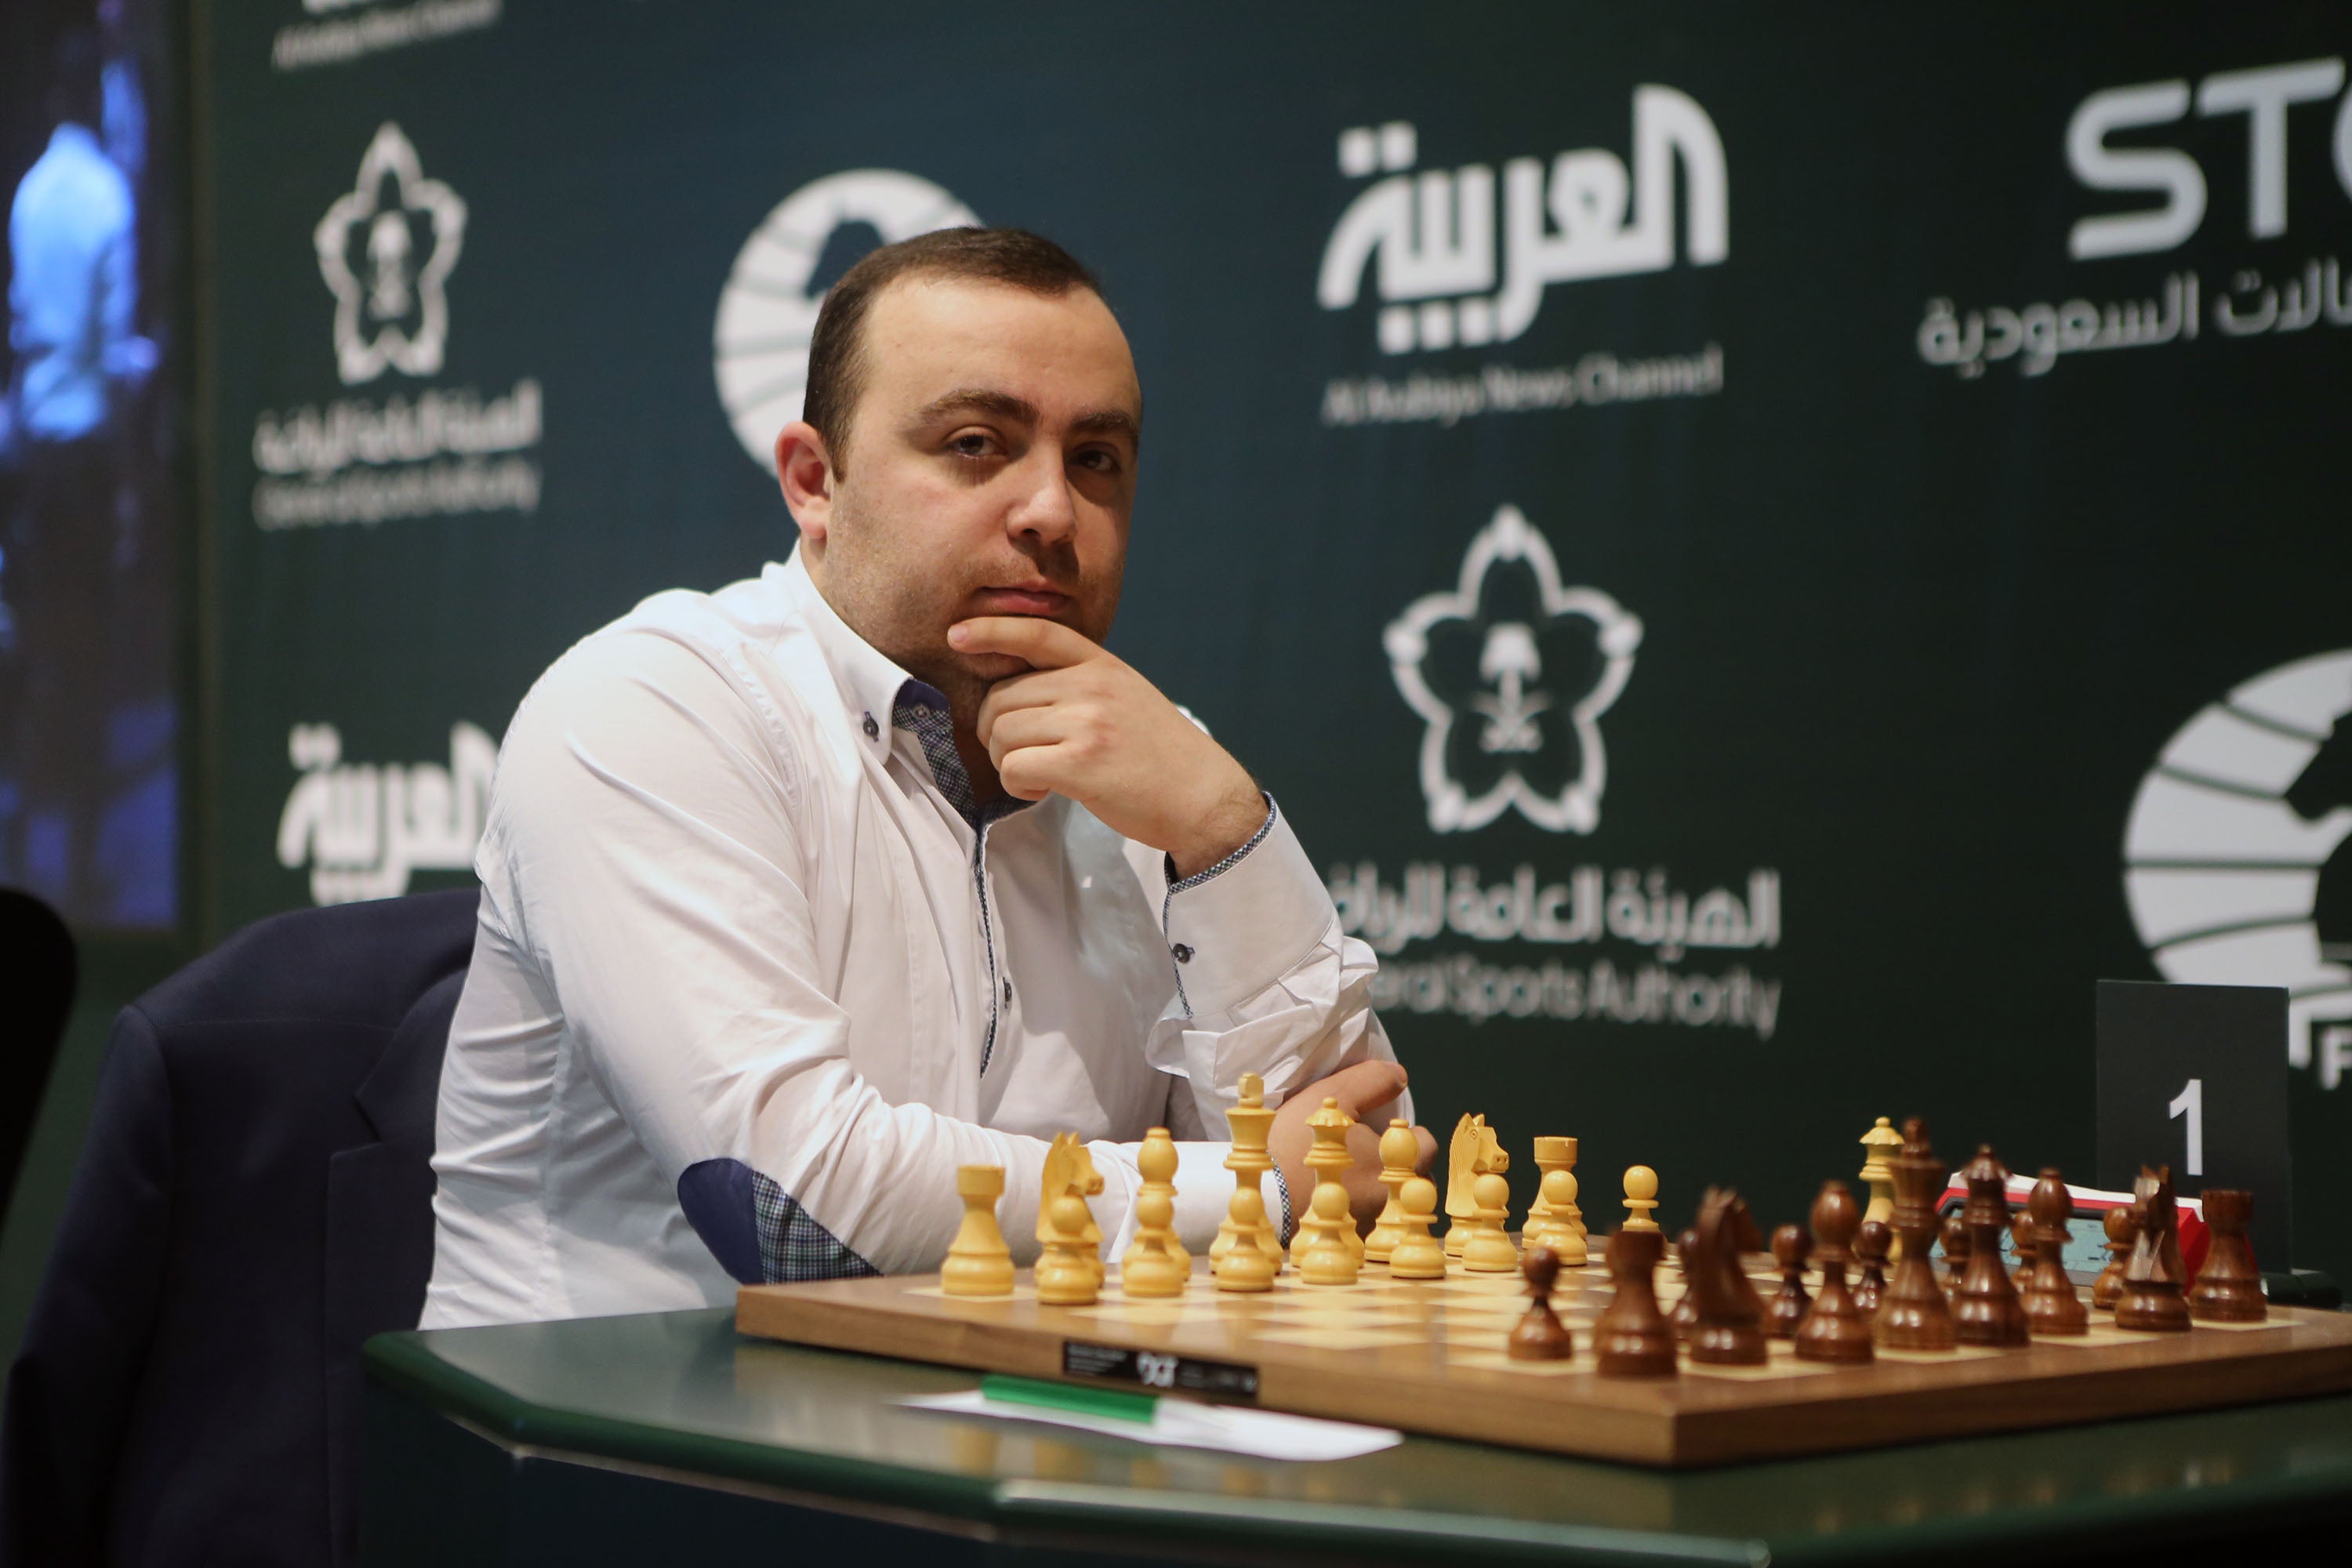 Tigran Petrosian alleged his opponent Gaioz Nigalidze had been acting suspiciously by repeatedly going to the bathroom during games. (Photo: Salah Malkawi, Getty Images)